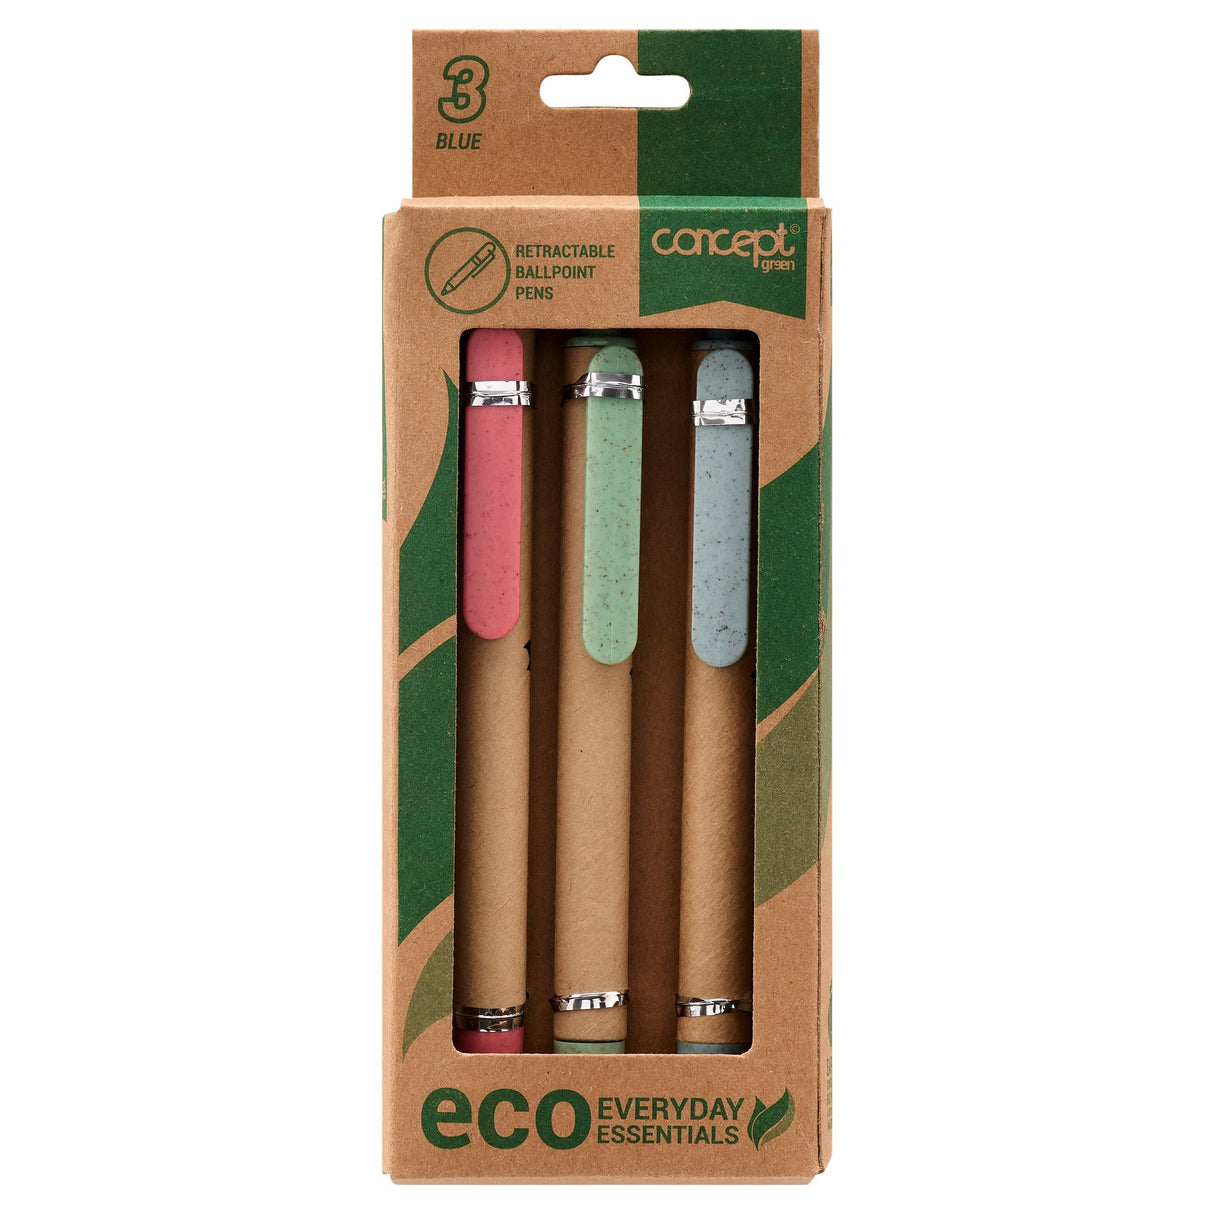 Concept Green Retractable Ballpoint Pens - Pack of 3 | Stationery Shop UK